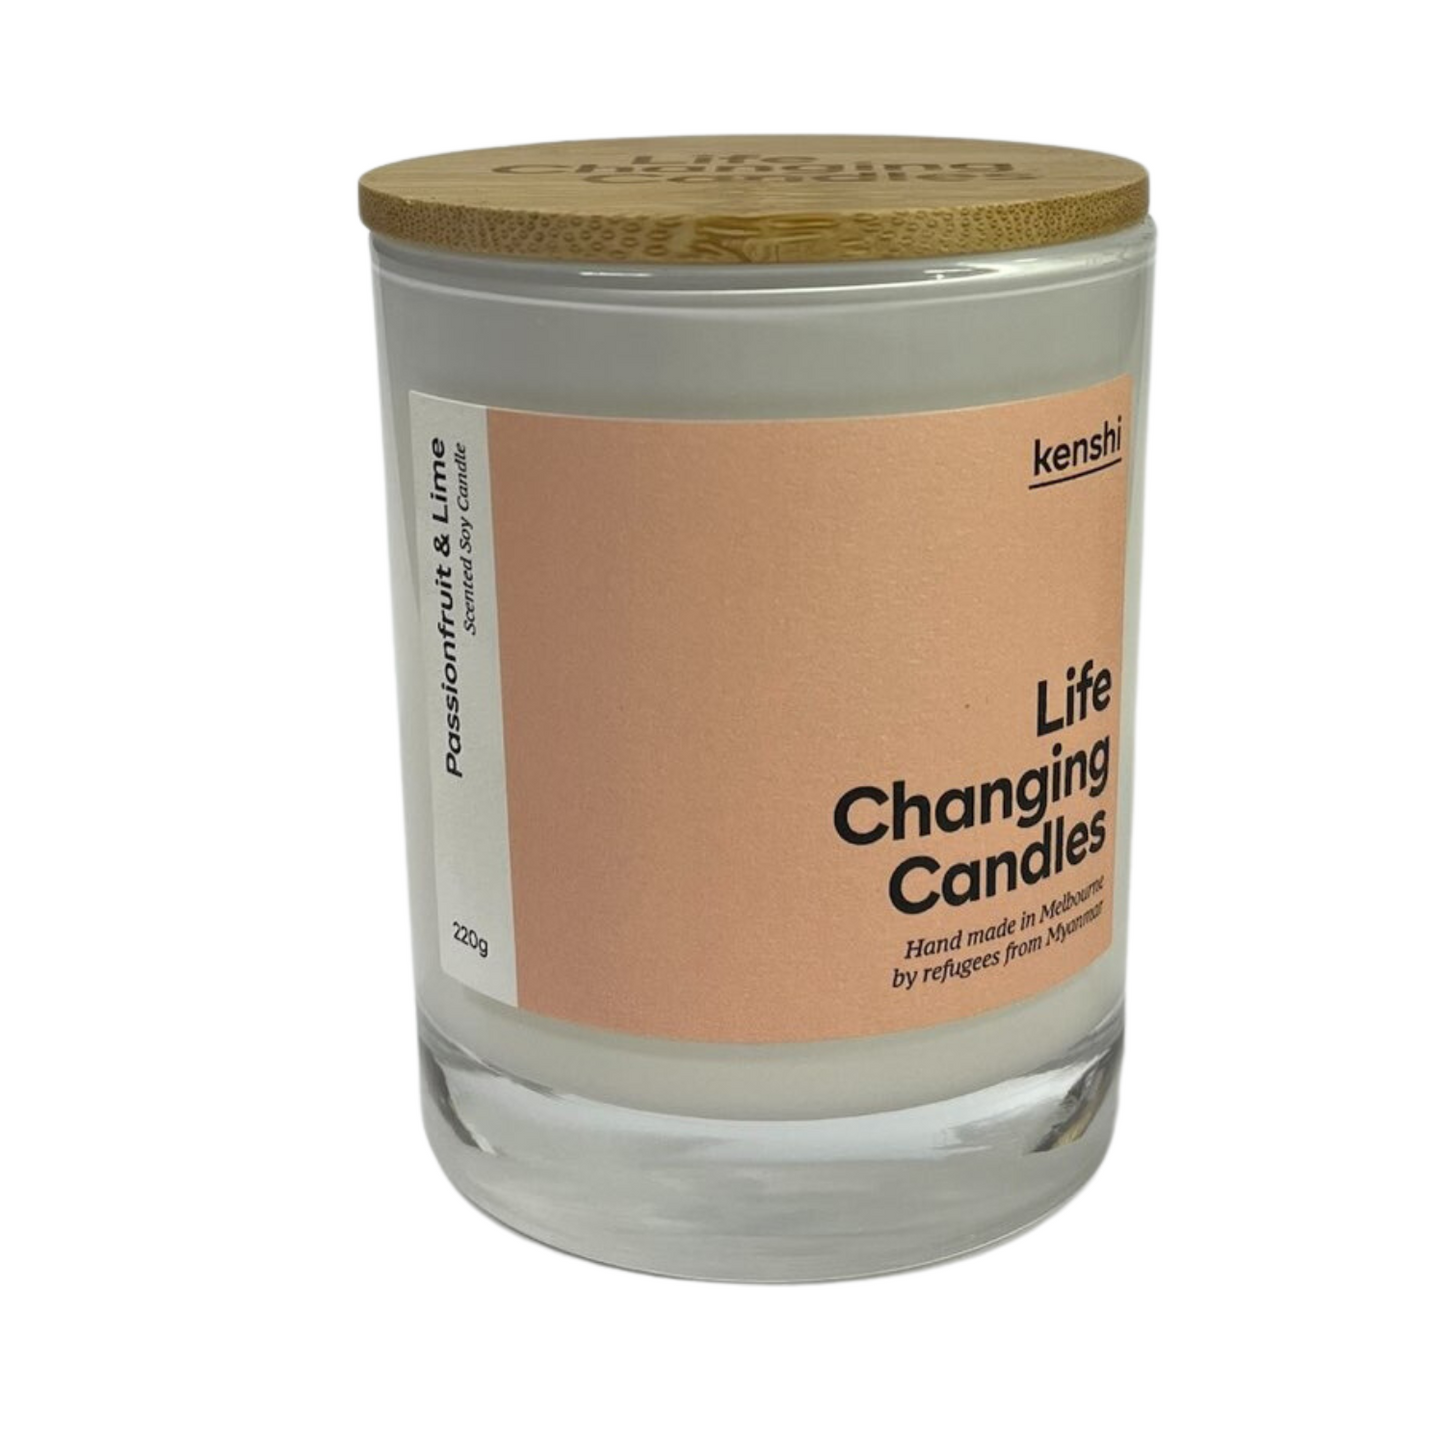 Mid-size candle 220g